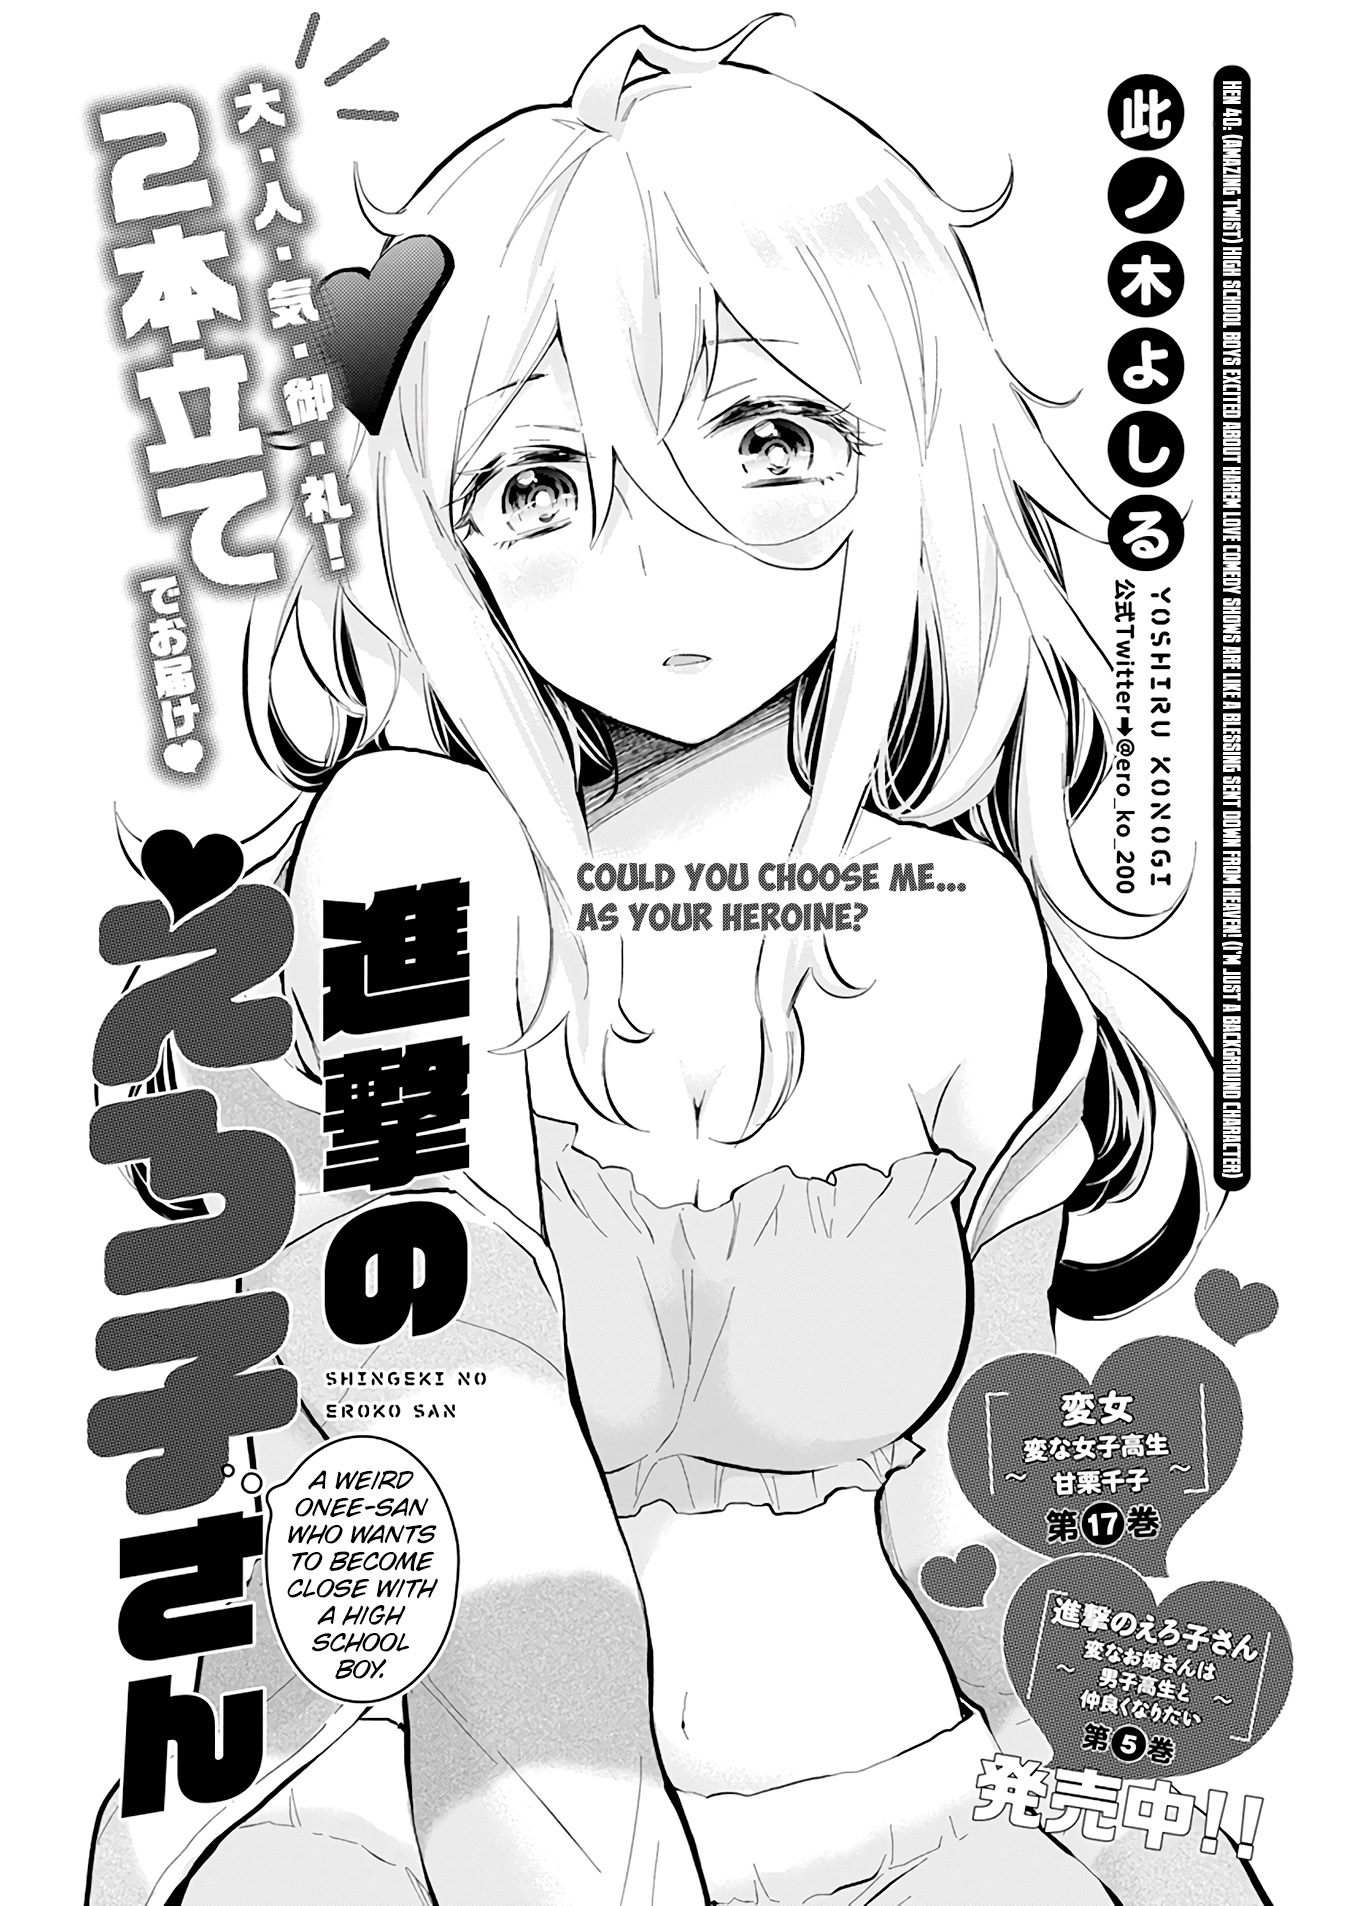 Shingeki No Eroko-San Vol.6 Chapter 40: (Amazing Twist) High School Boys Excited About Harem Love Comedy Shows Are Like A Blessing Sent Down From Heaven! (I’M Just A Background Character) - Picture 2